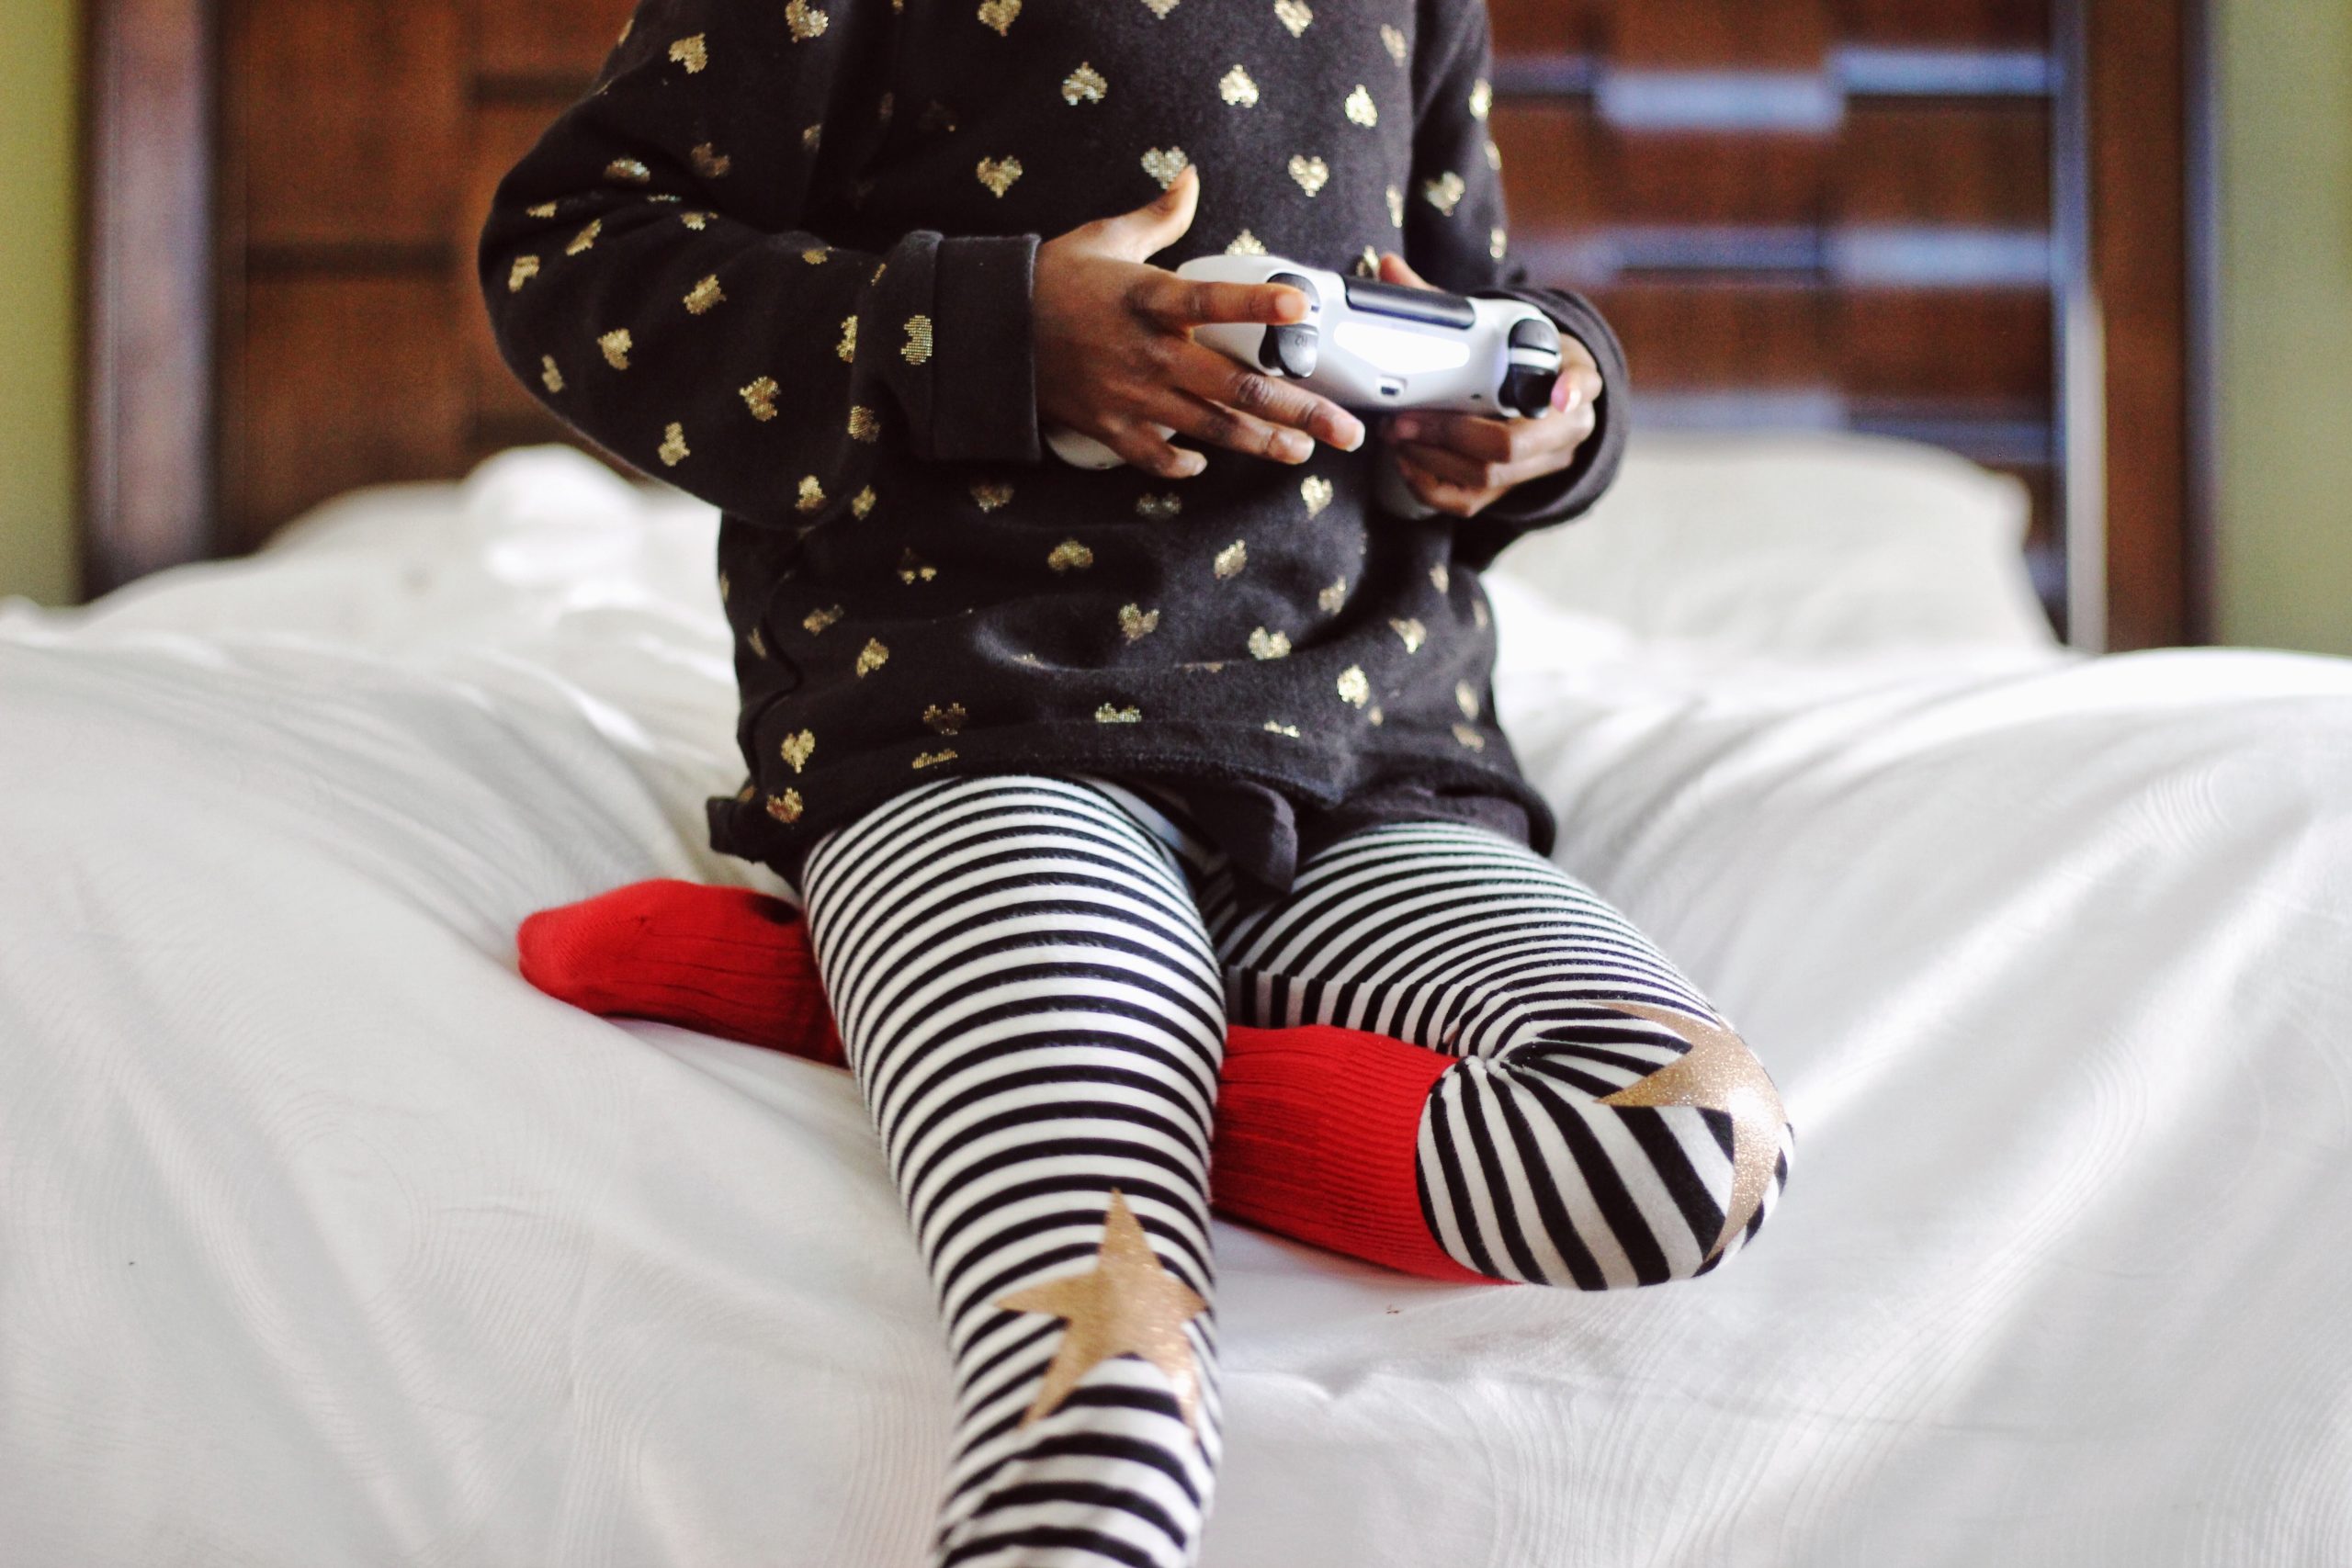 How Black Girl Gamers is changing the gaming landscape for the better